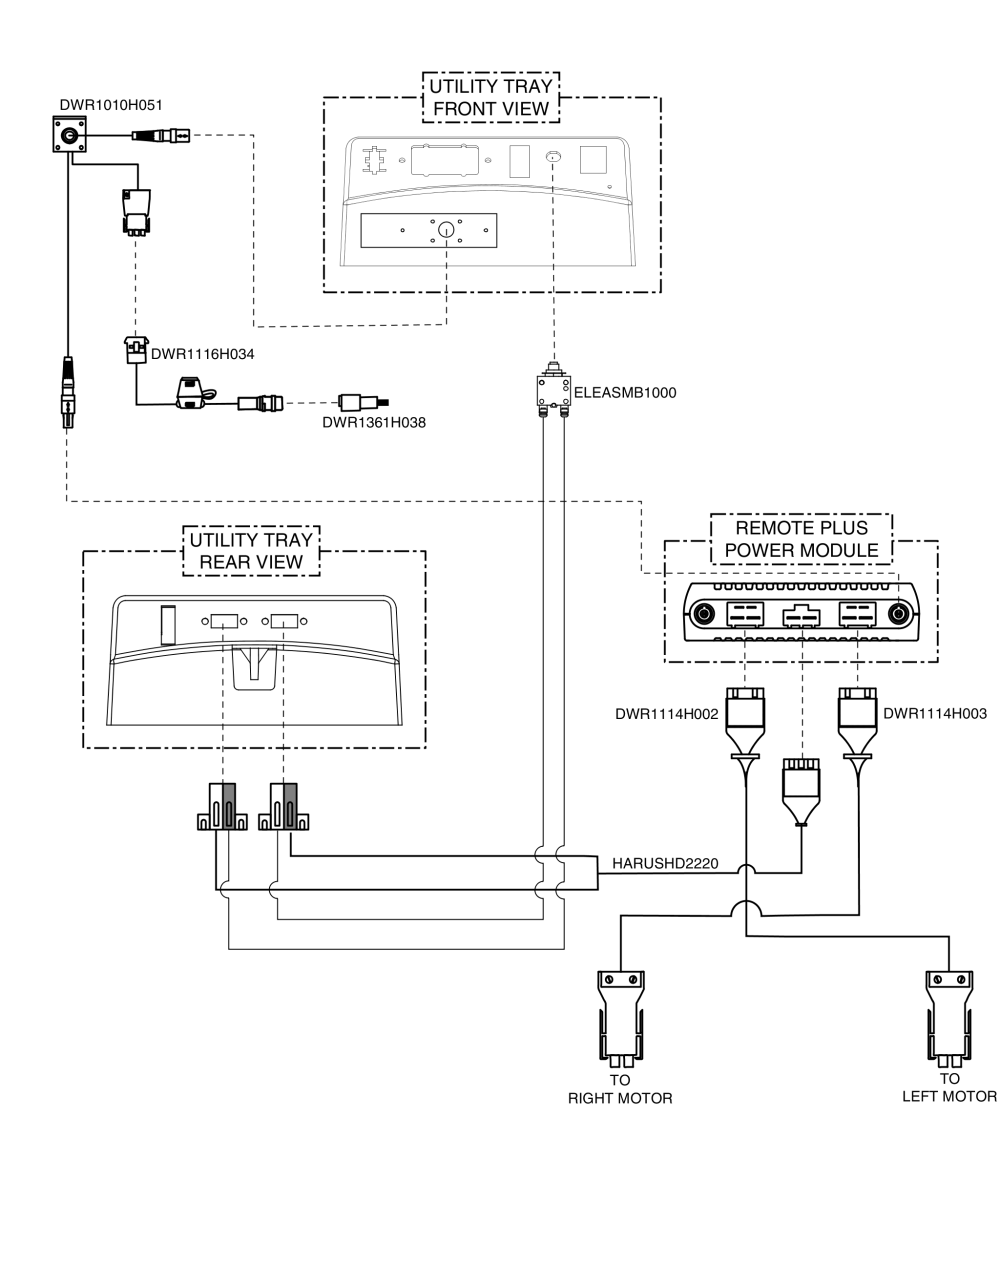 Remote Plus, Quantum Ready, Off-board Charger, Electrical System Diagram, Jazzy 1113 Ats parts diagram